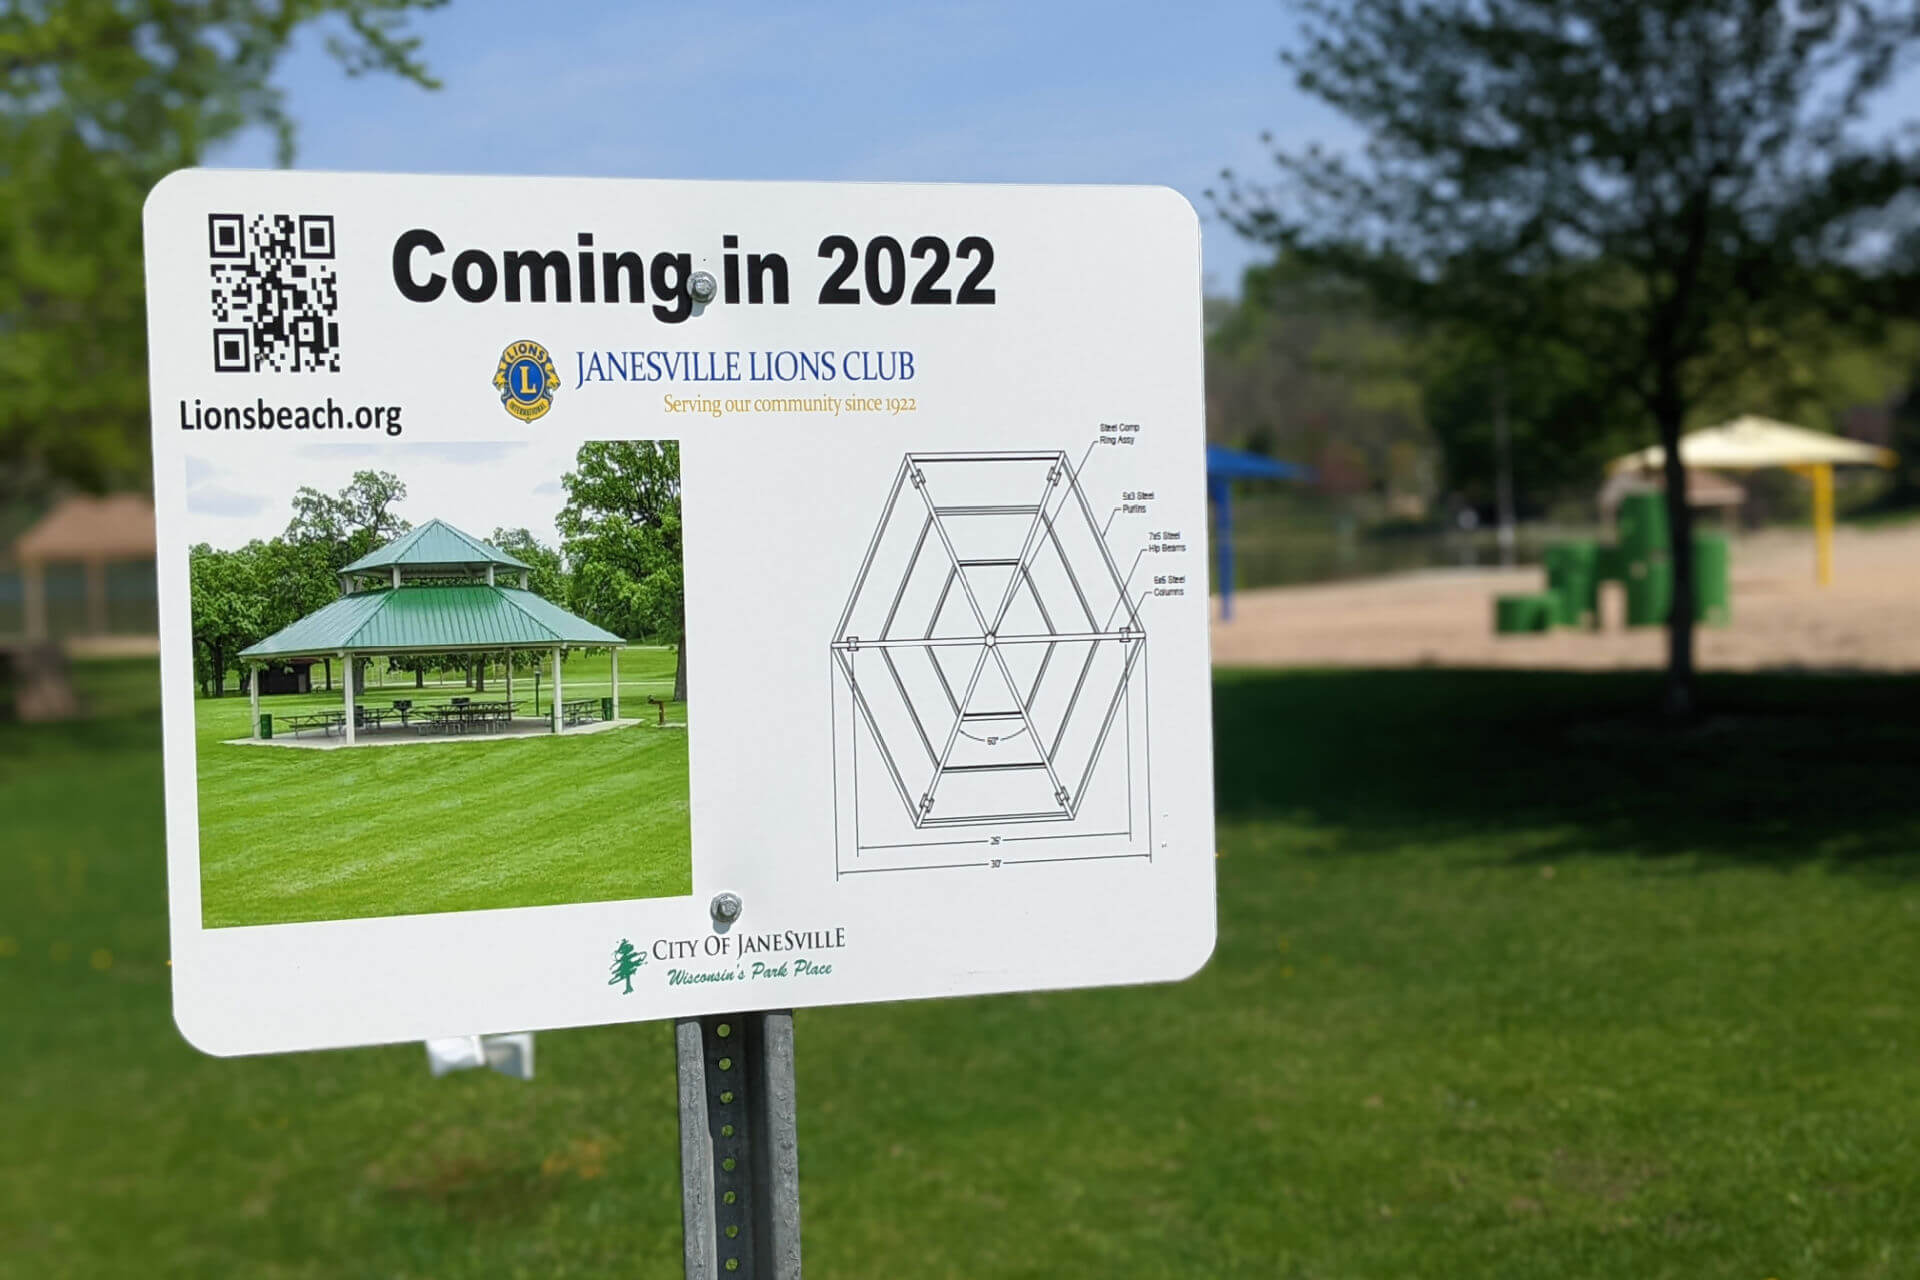 A coming soon sign for a new picnic pavilion is seen at Lions Beach in early May 2021.